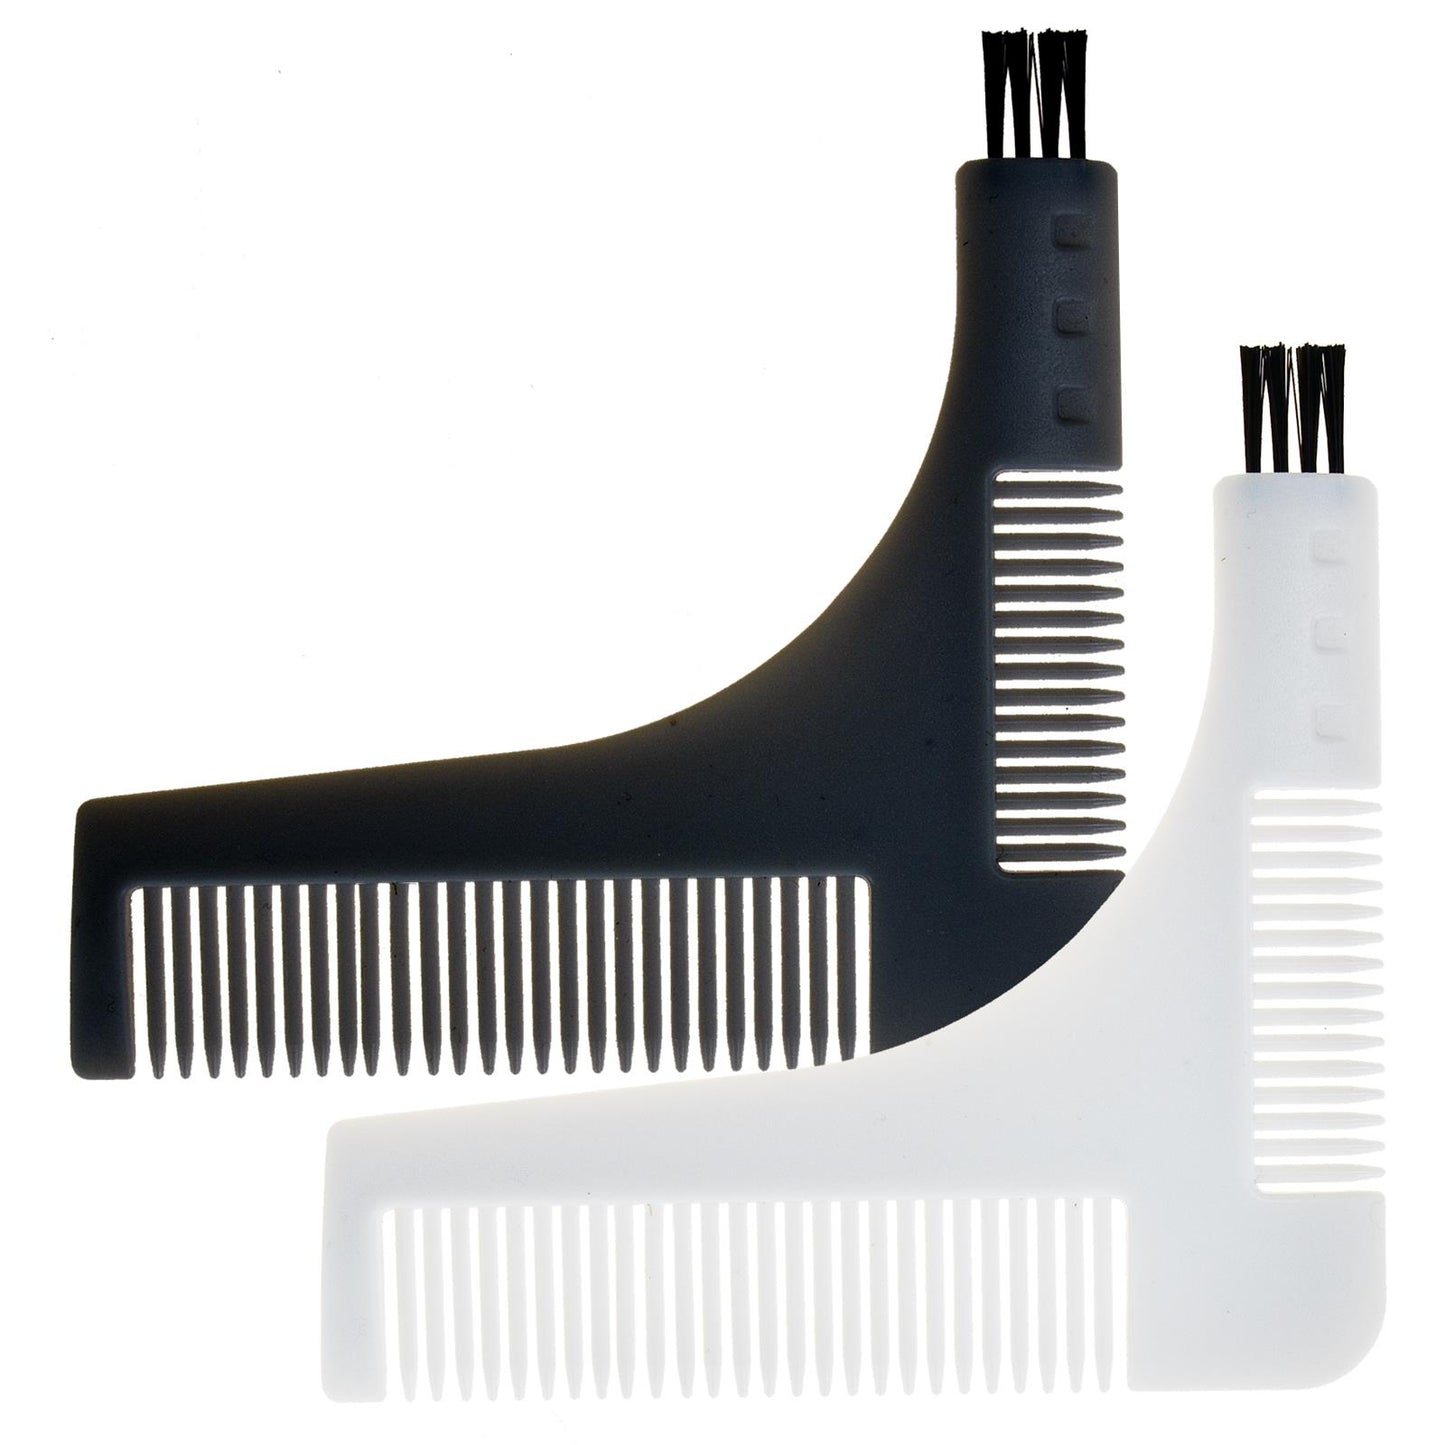 Beard Grooming Template for Symmetrical Styling